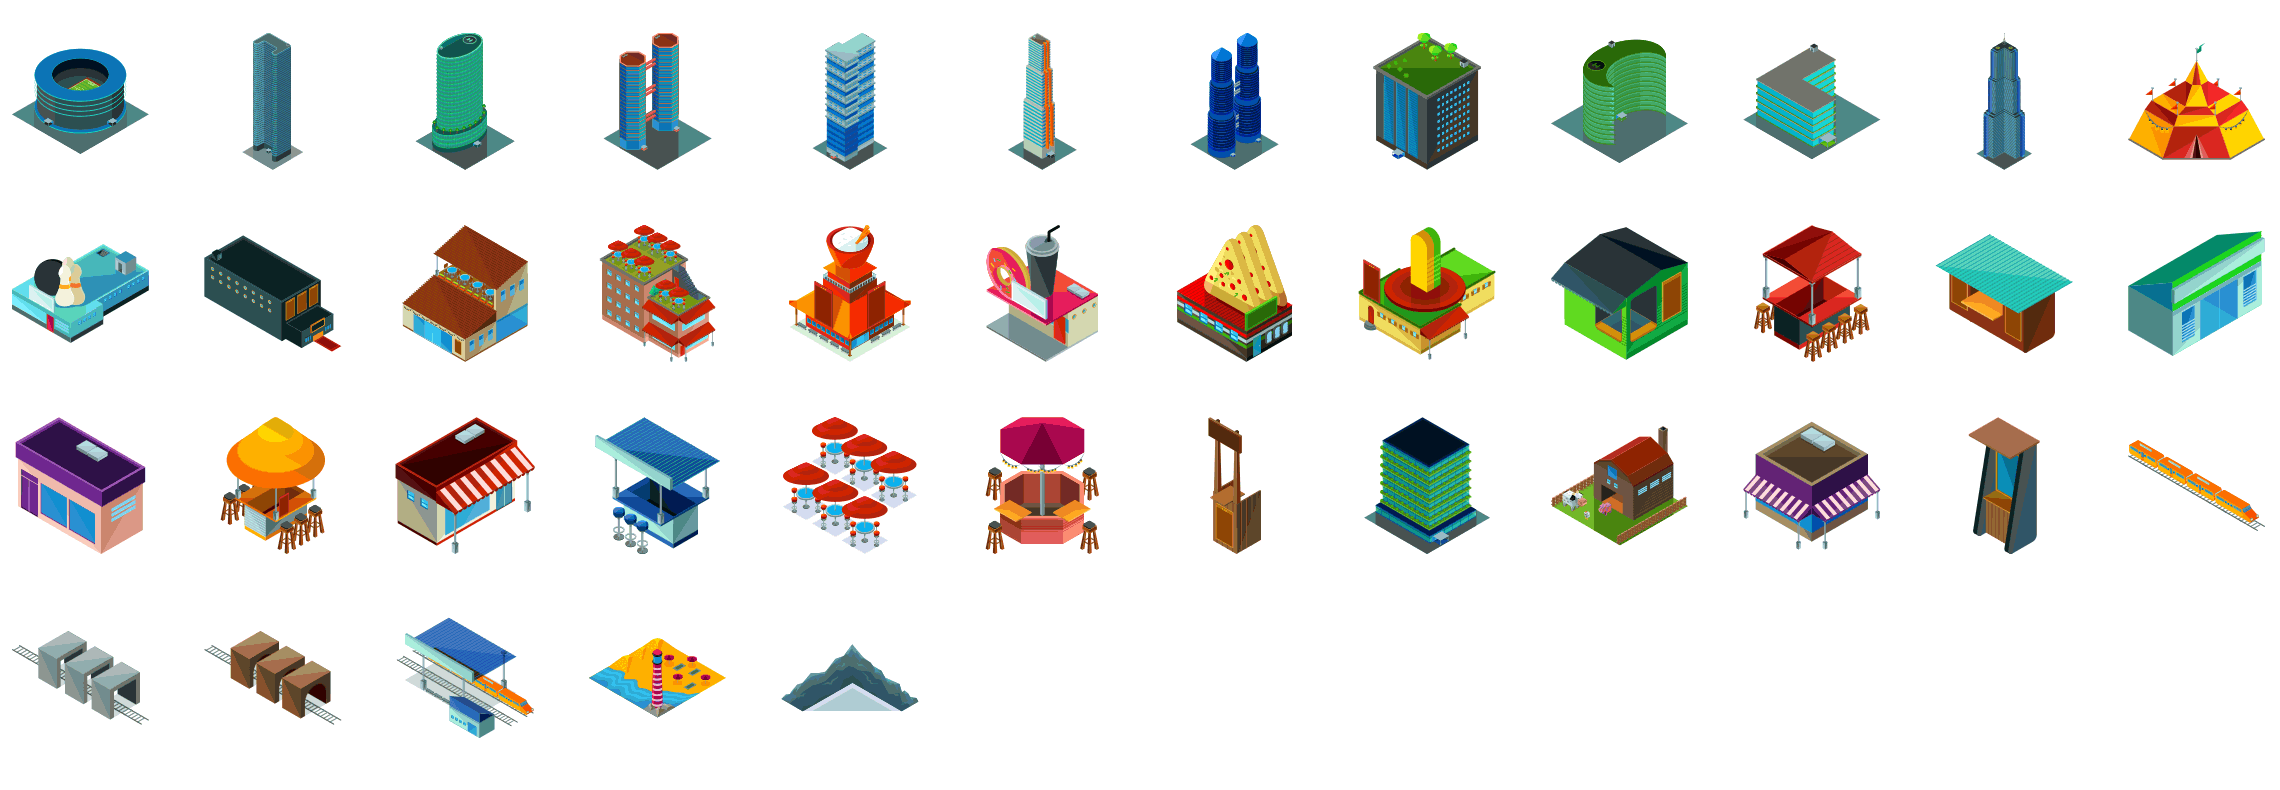 businessess-isometric-icons-preview